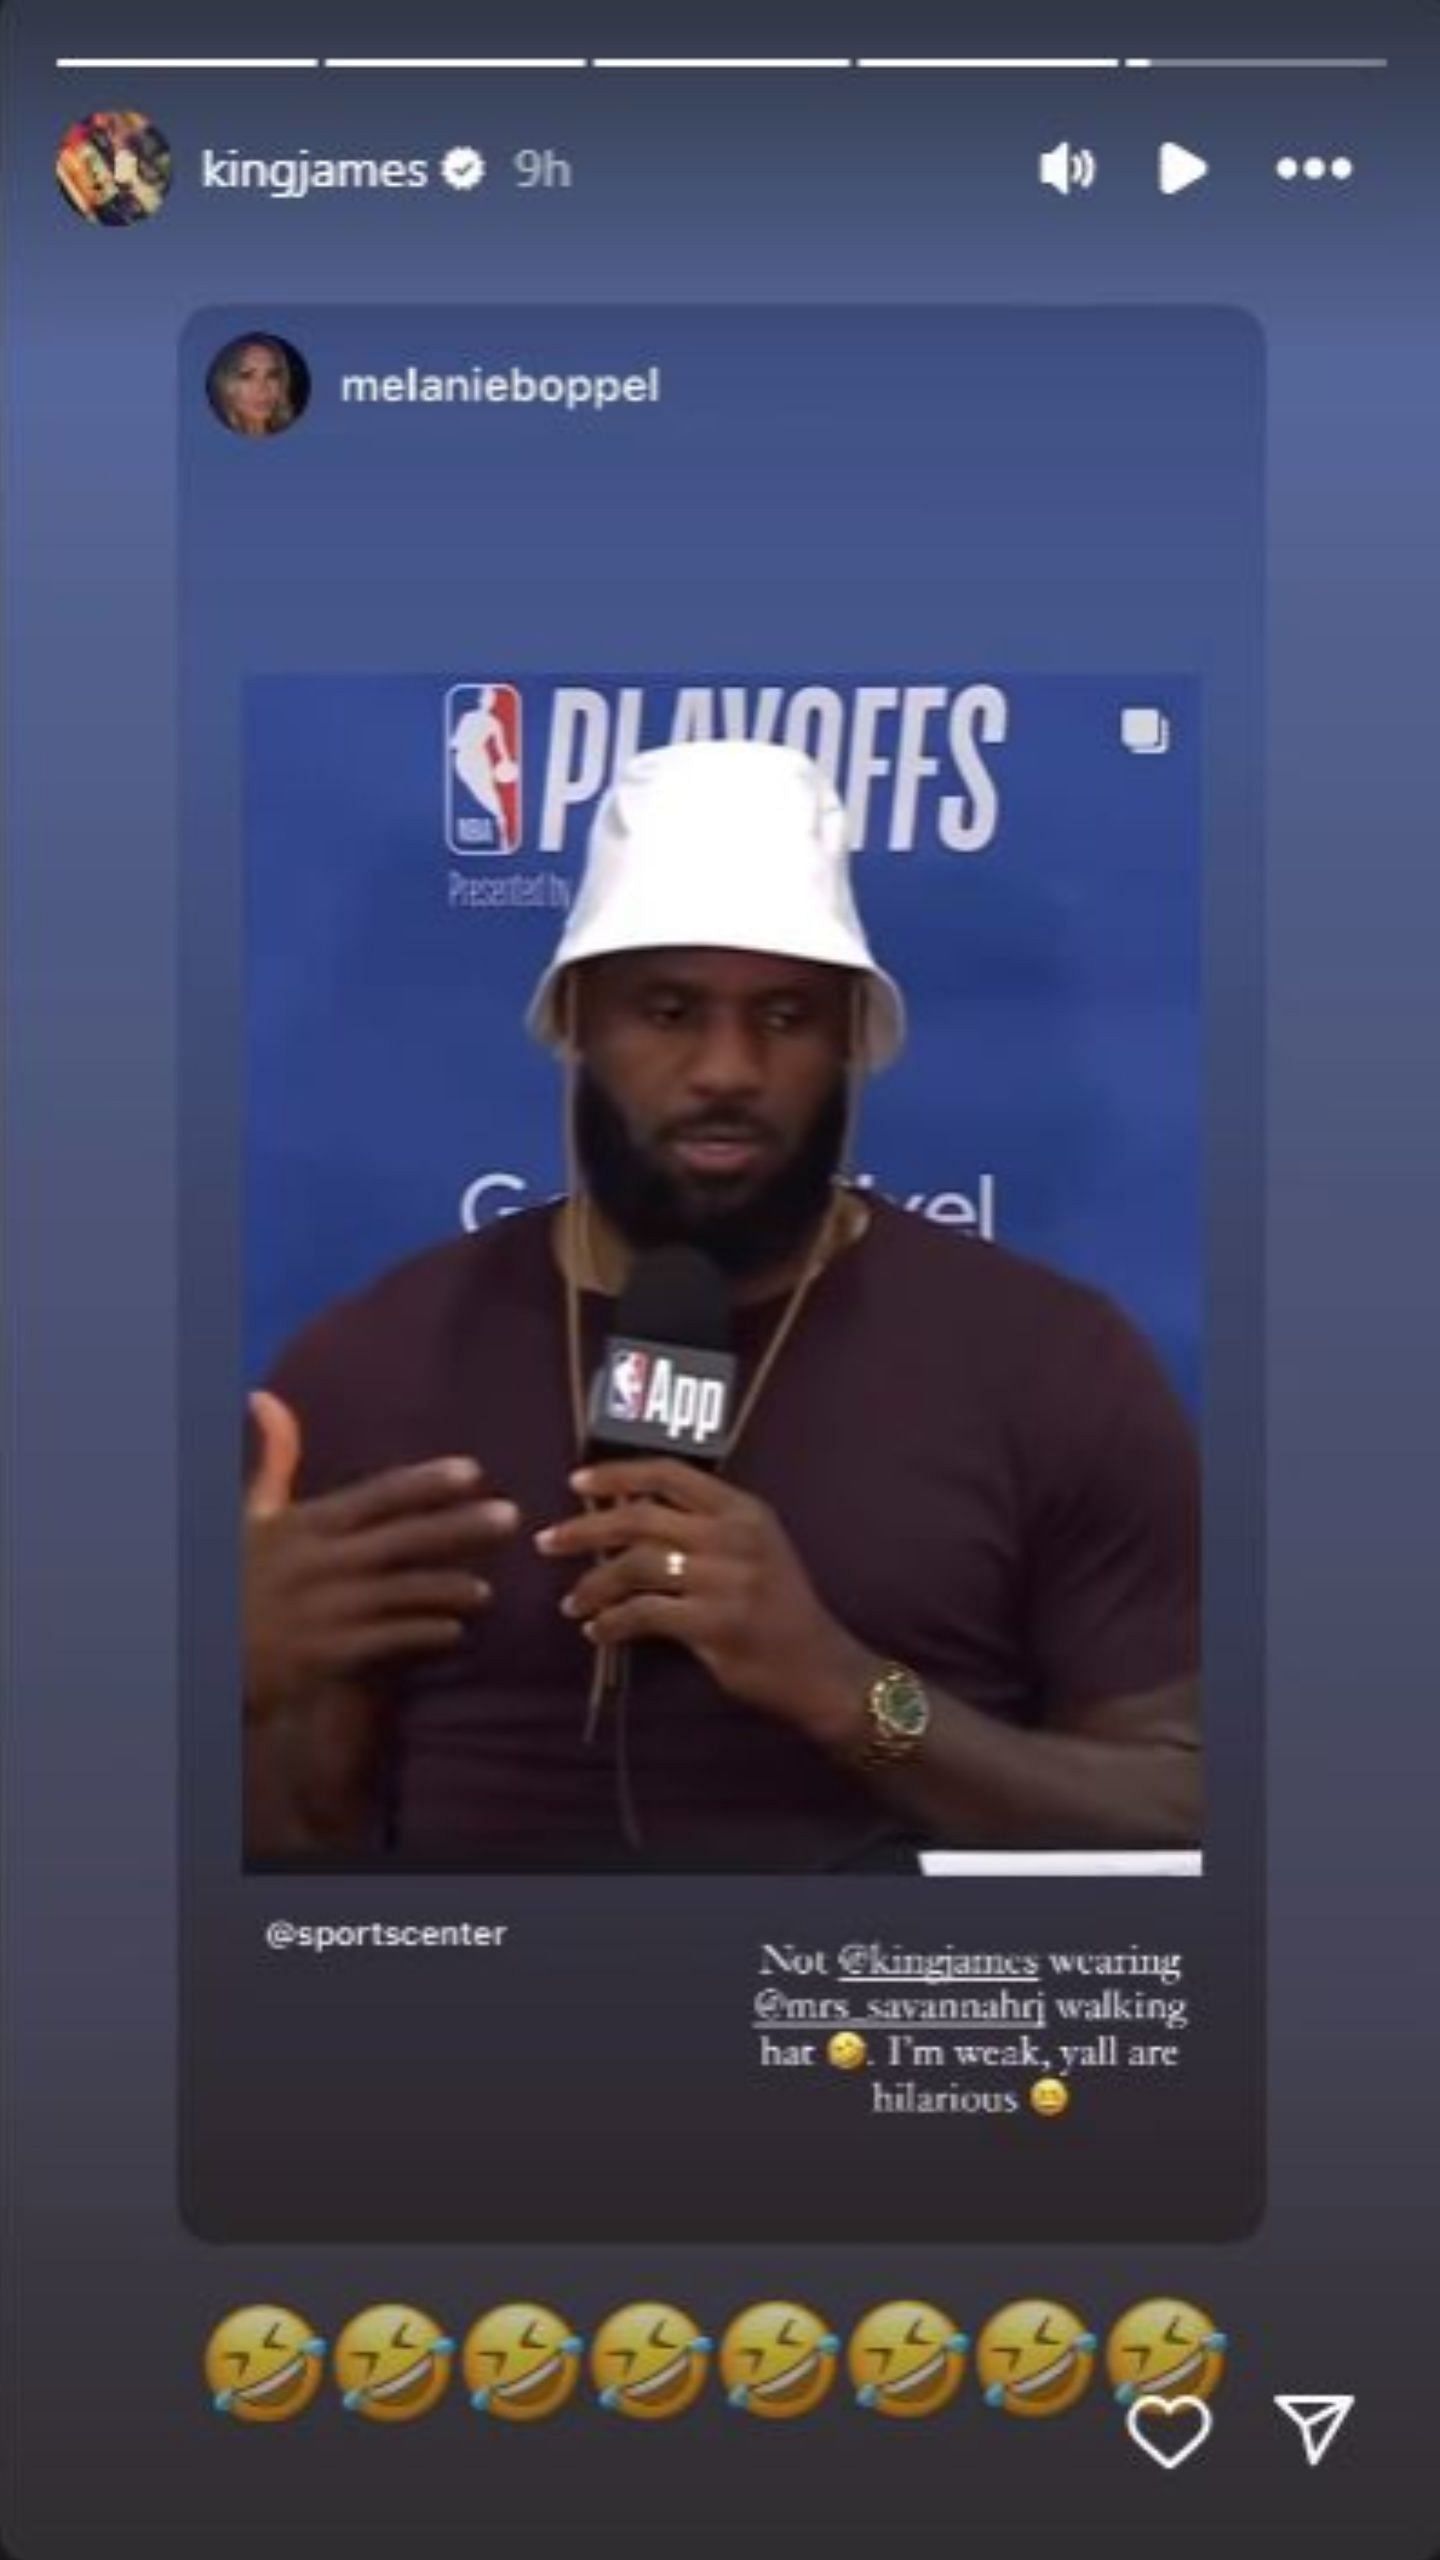 LeBron James shared this on his Instagram stories.